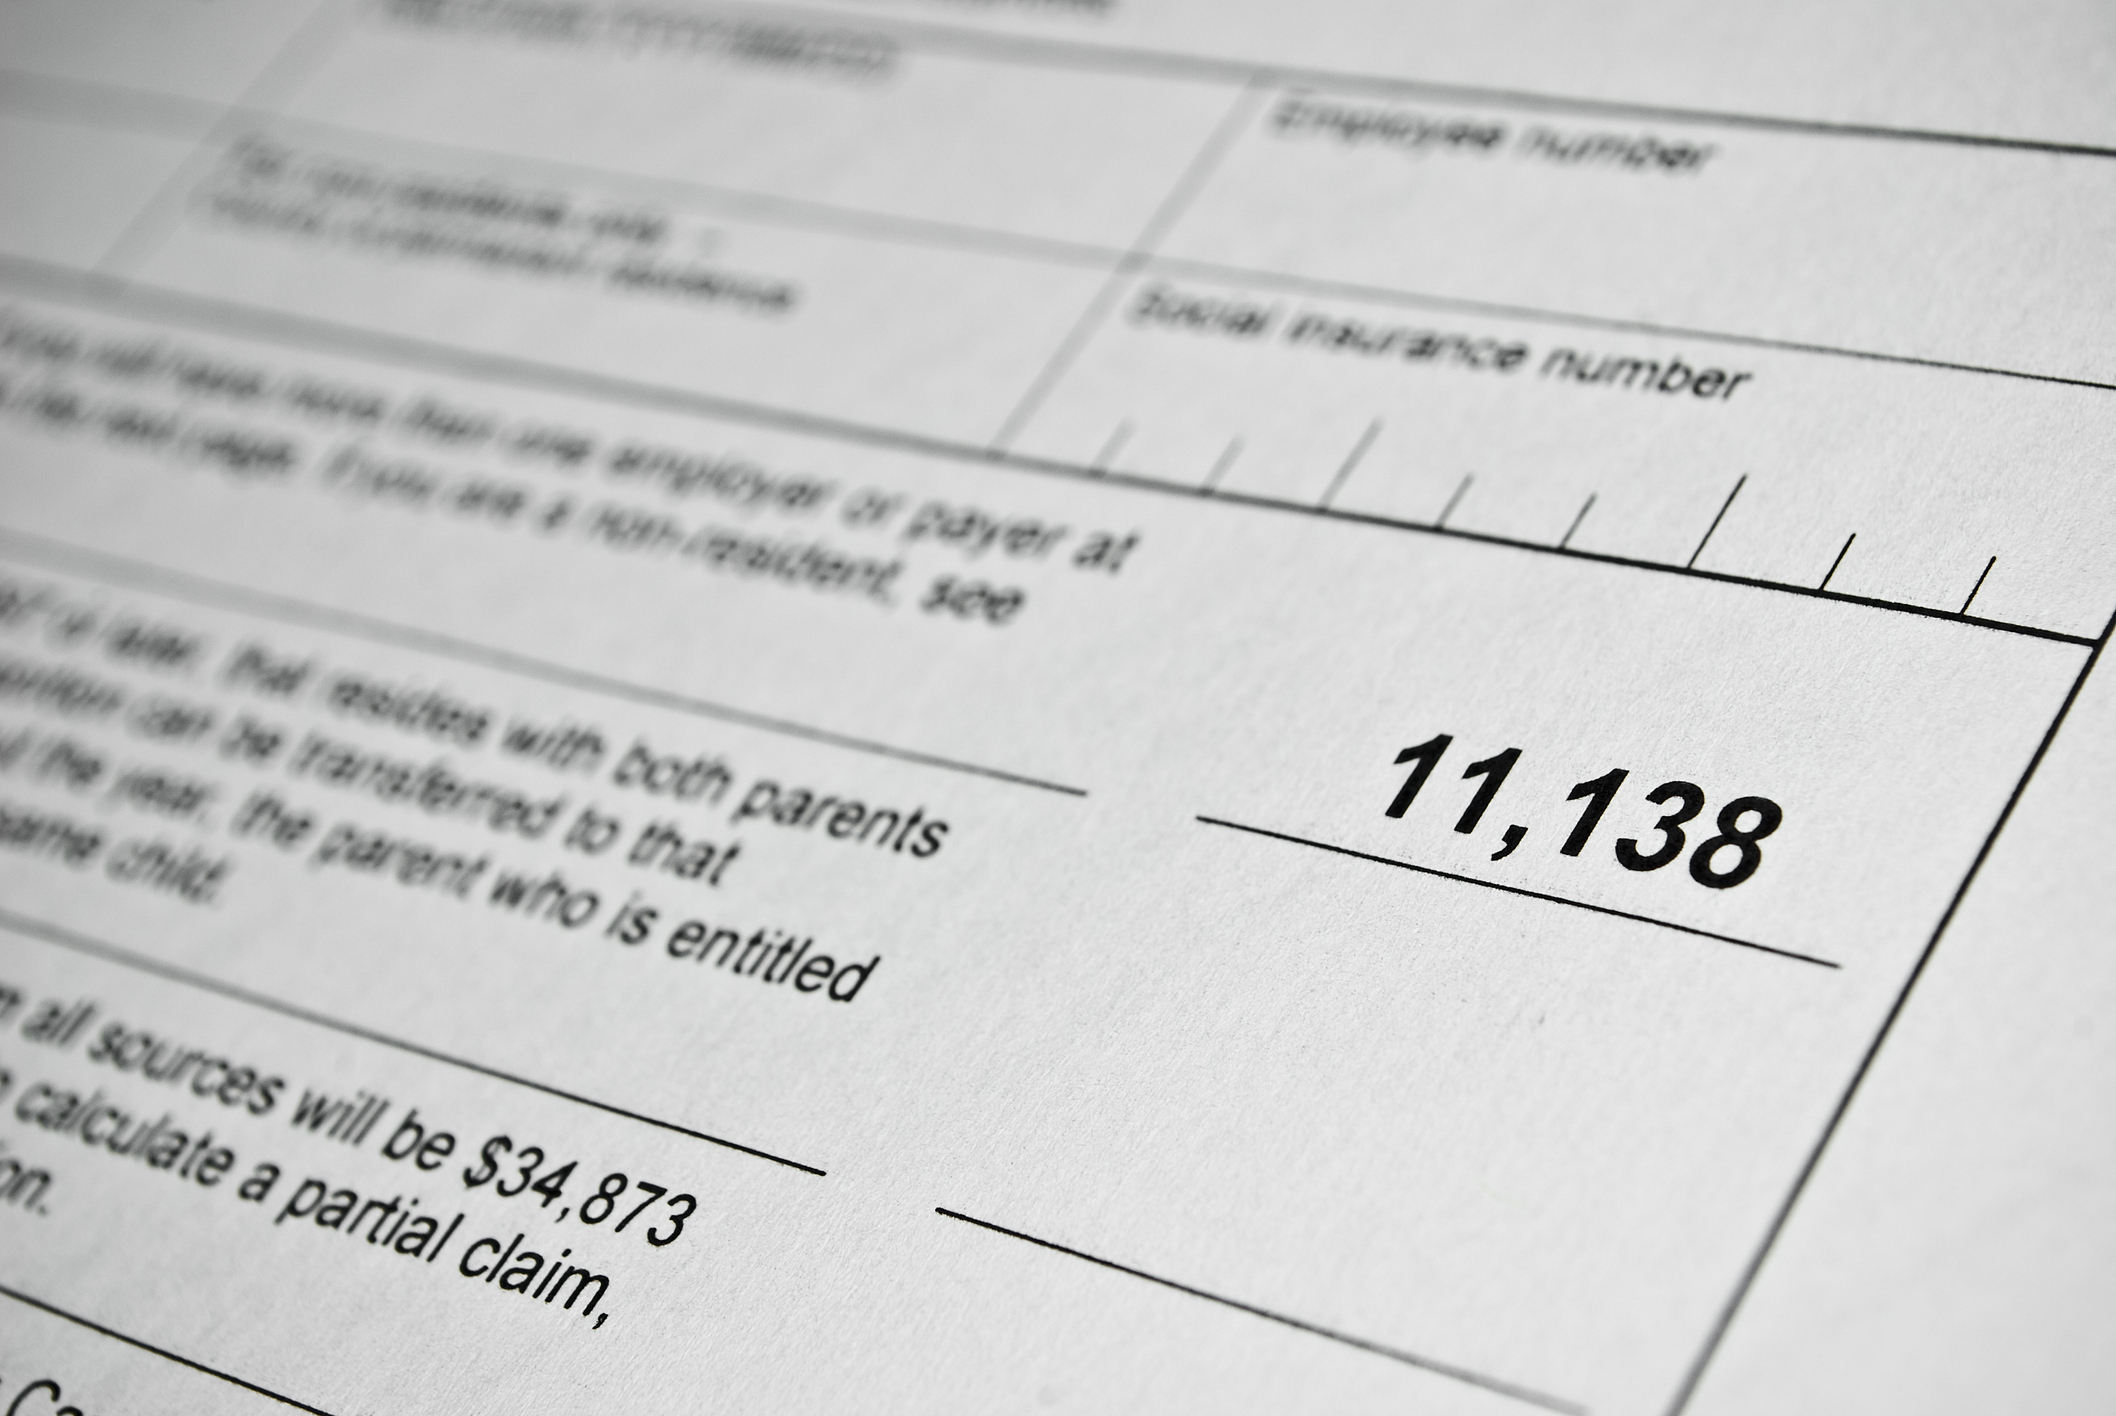 Canada Revenue Agency tax form with amount owing of more than $10,000